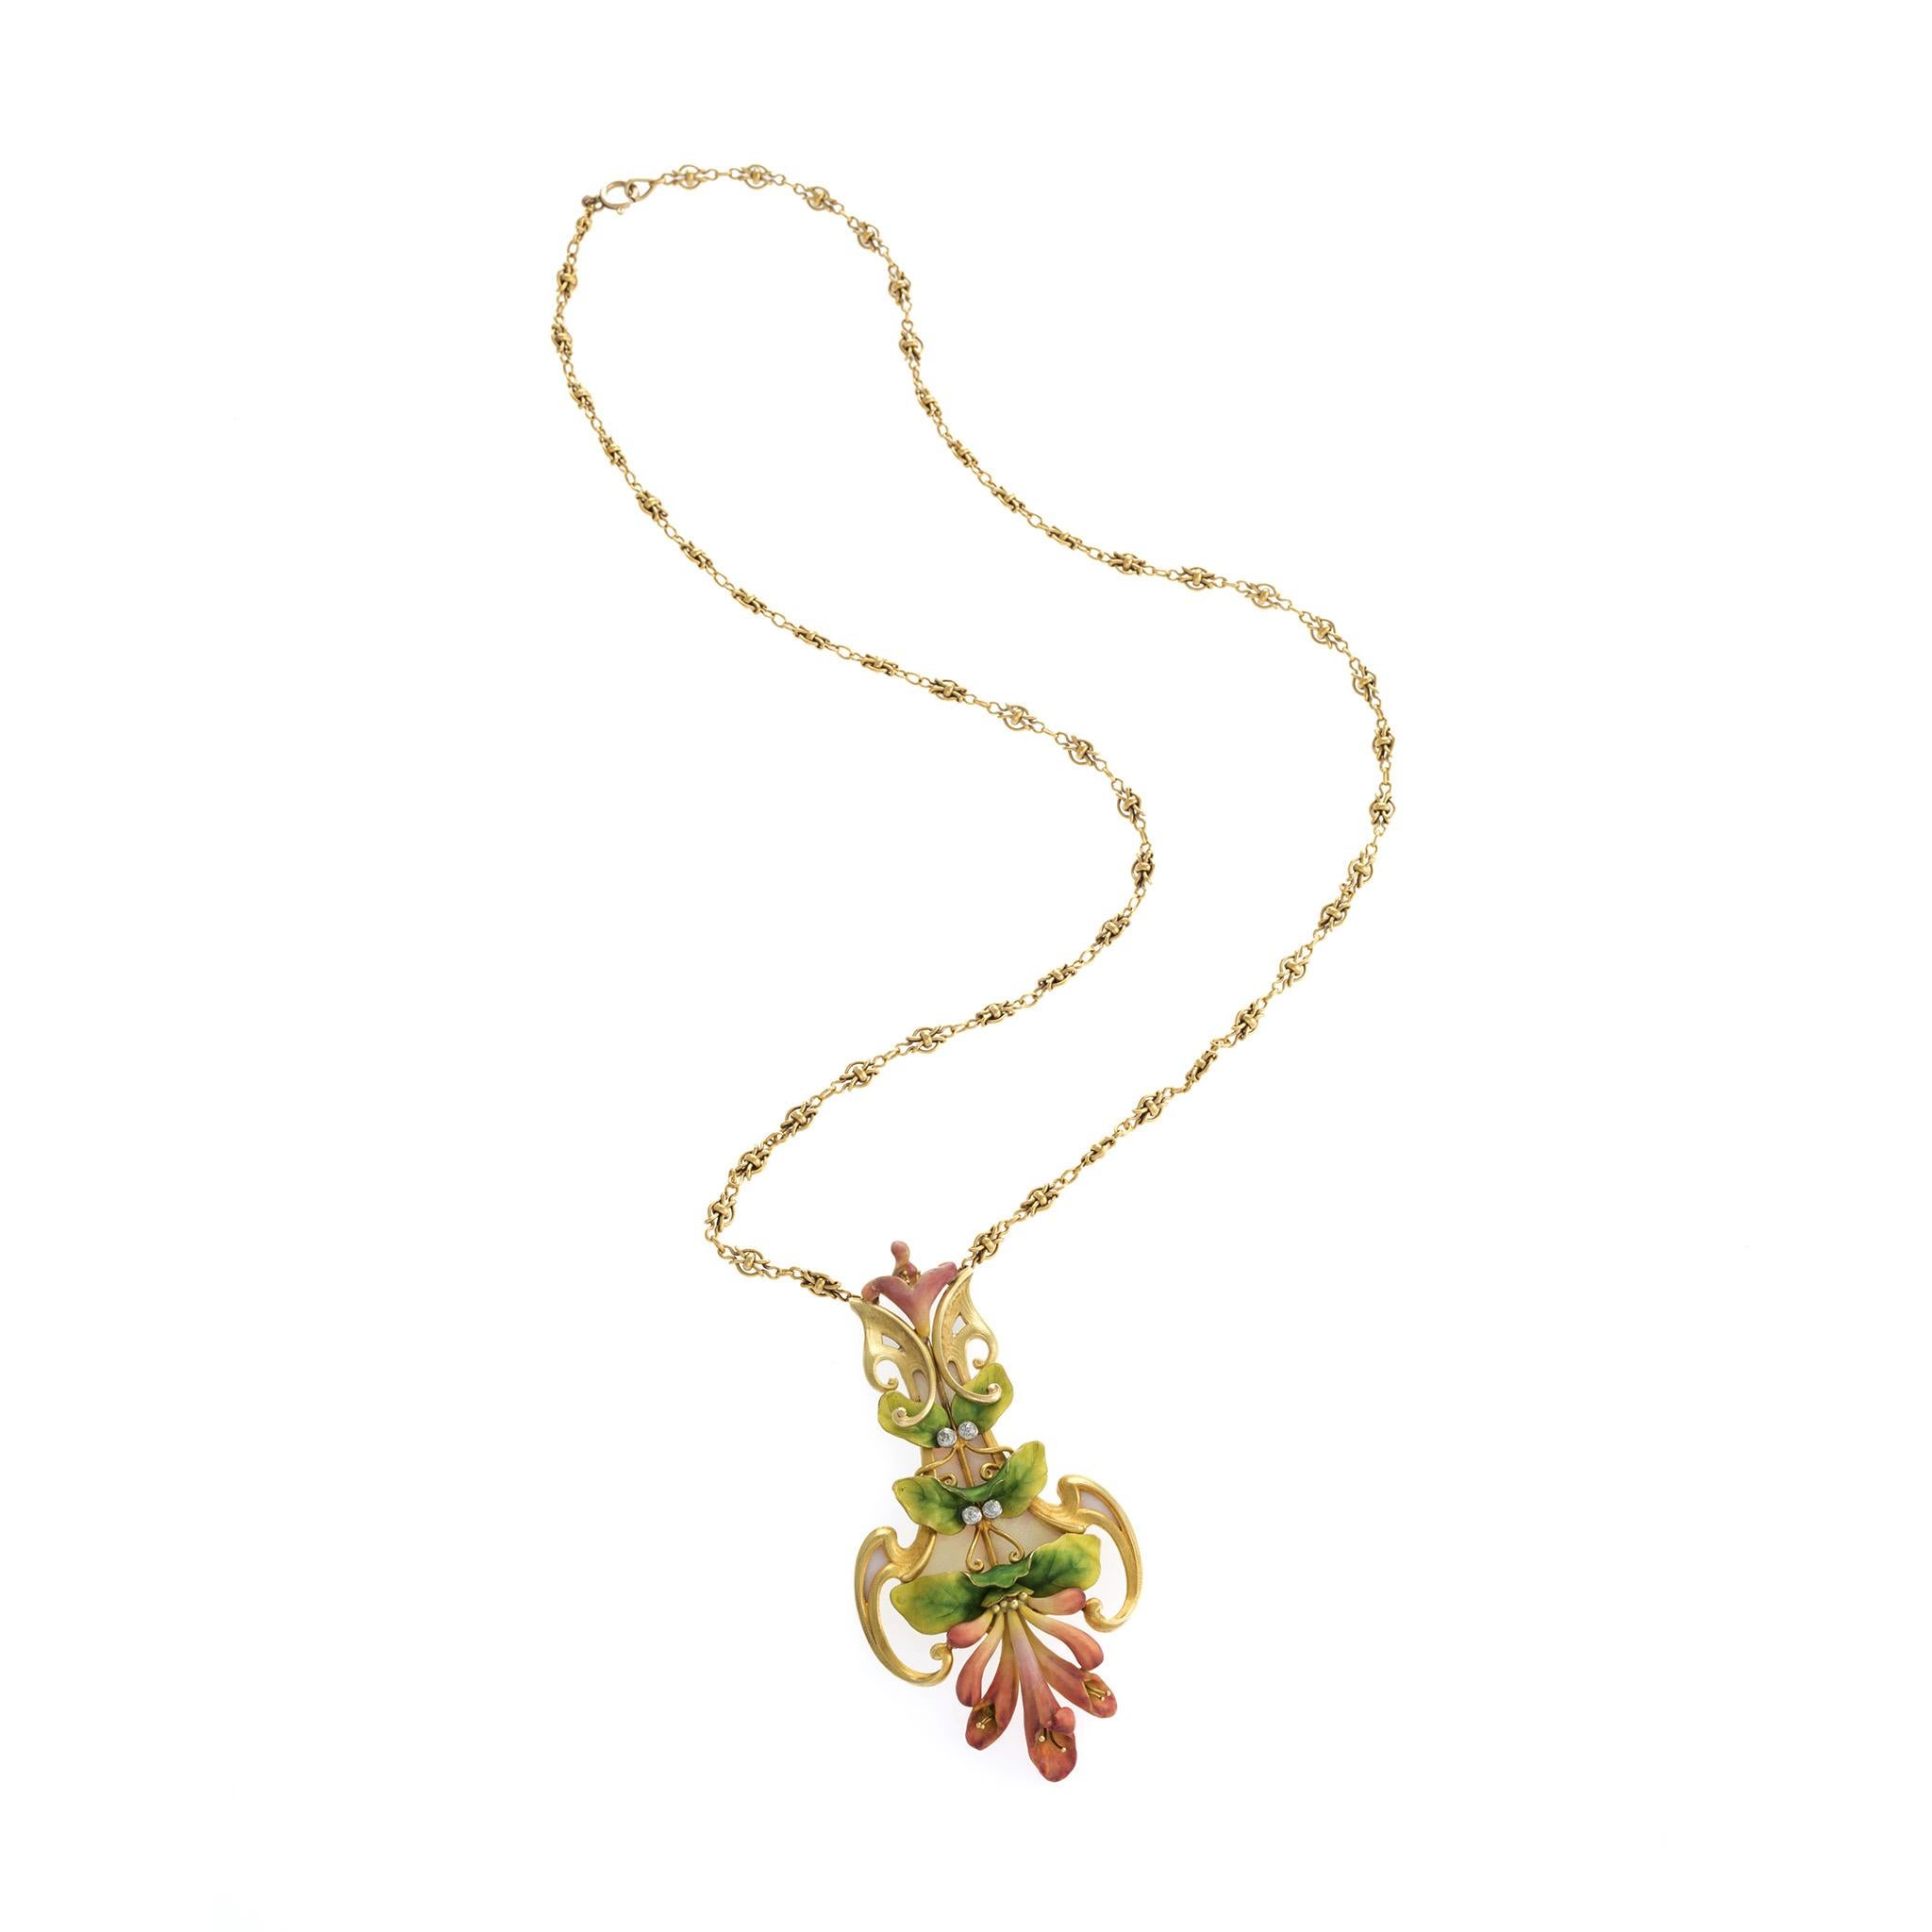 This gold, enamel, and diamond flower pendant necklace was created around 1900 by Parisian Art Nouveau jeweler, Antoine Bricteux. Designed as a polychrome trumpet flower in rose, green and cream enamel, the pendant is a cascade of petals, leaves and